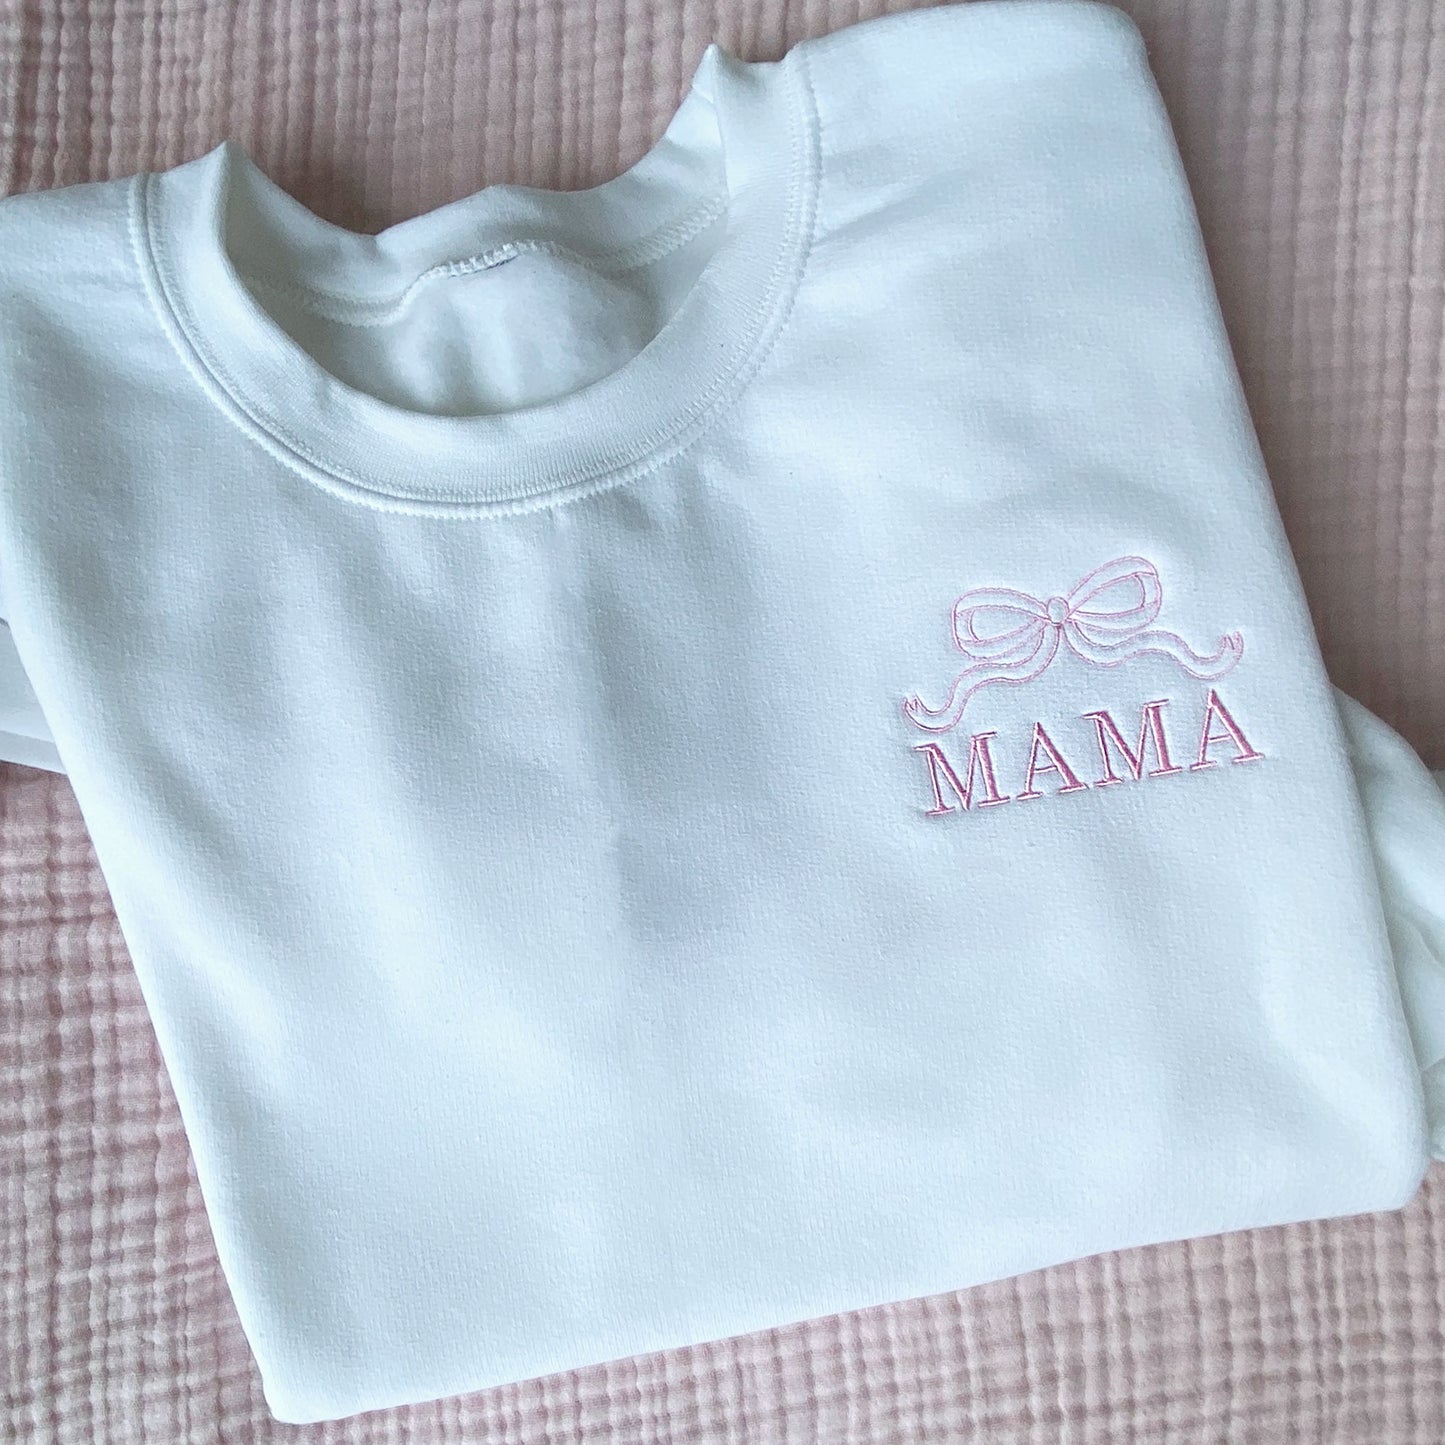 white crewneck sweatshirt with embroidered outline bow and all caps mama design on the left chest in baby pink thread